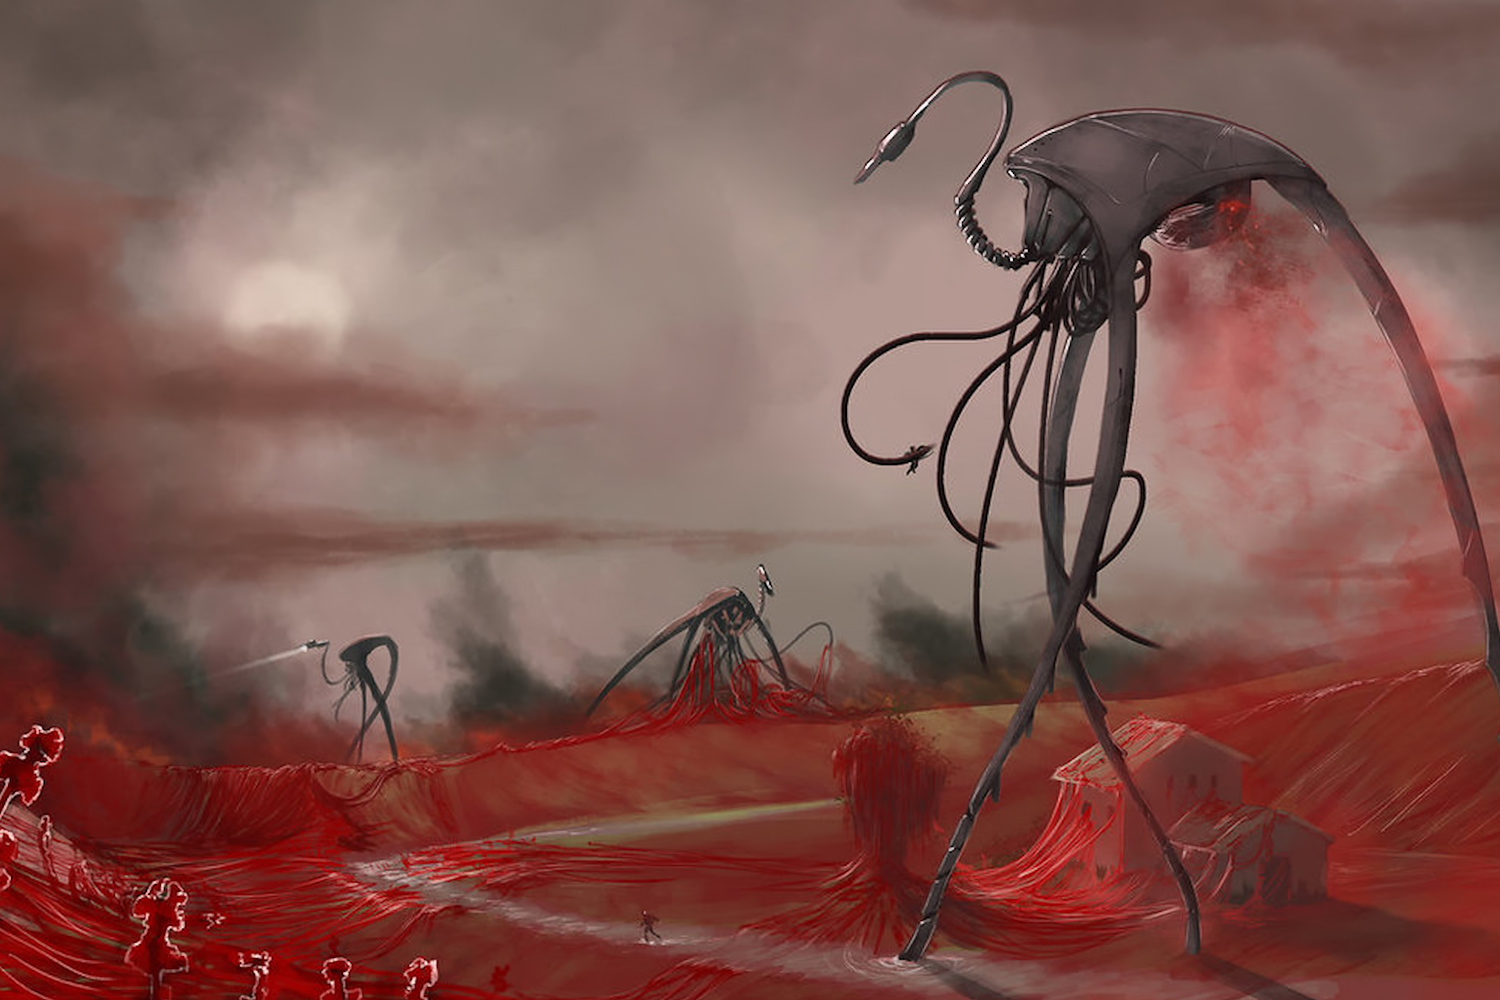 Digital artistic interpretation of War of the Worlds style Tripods spraying red dust over a farmhouse and fields